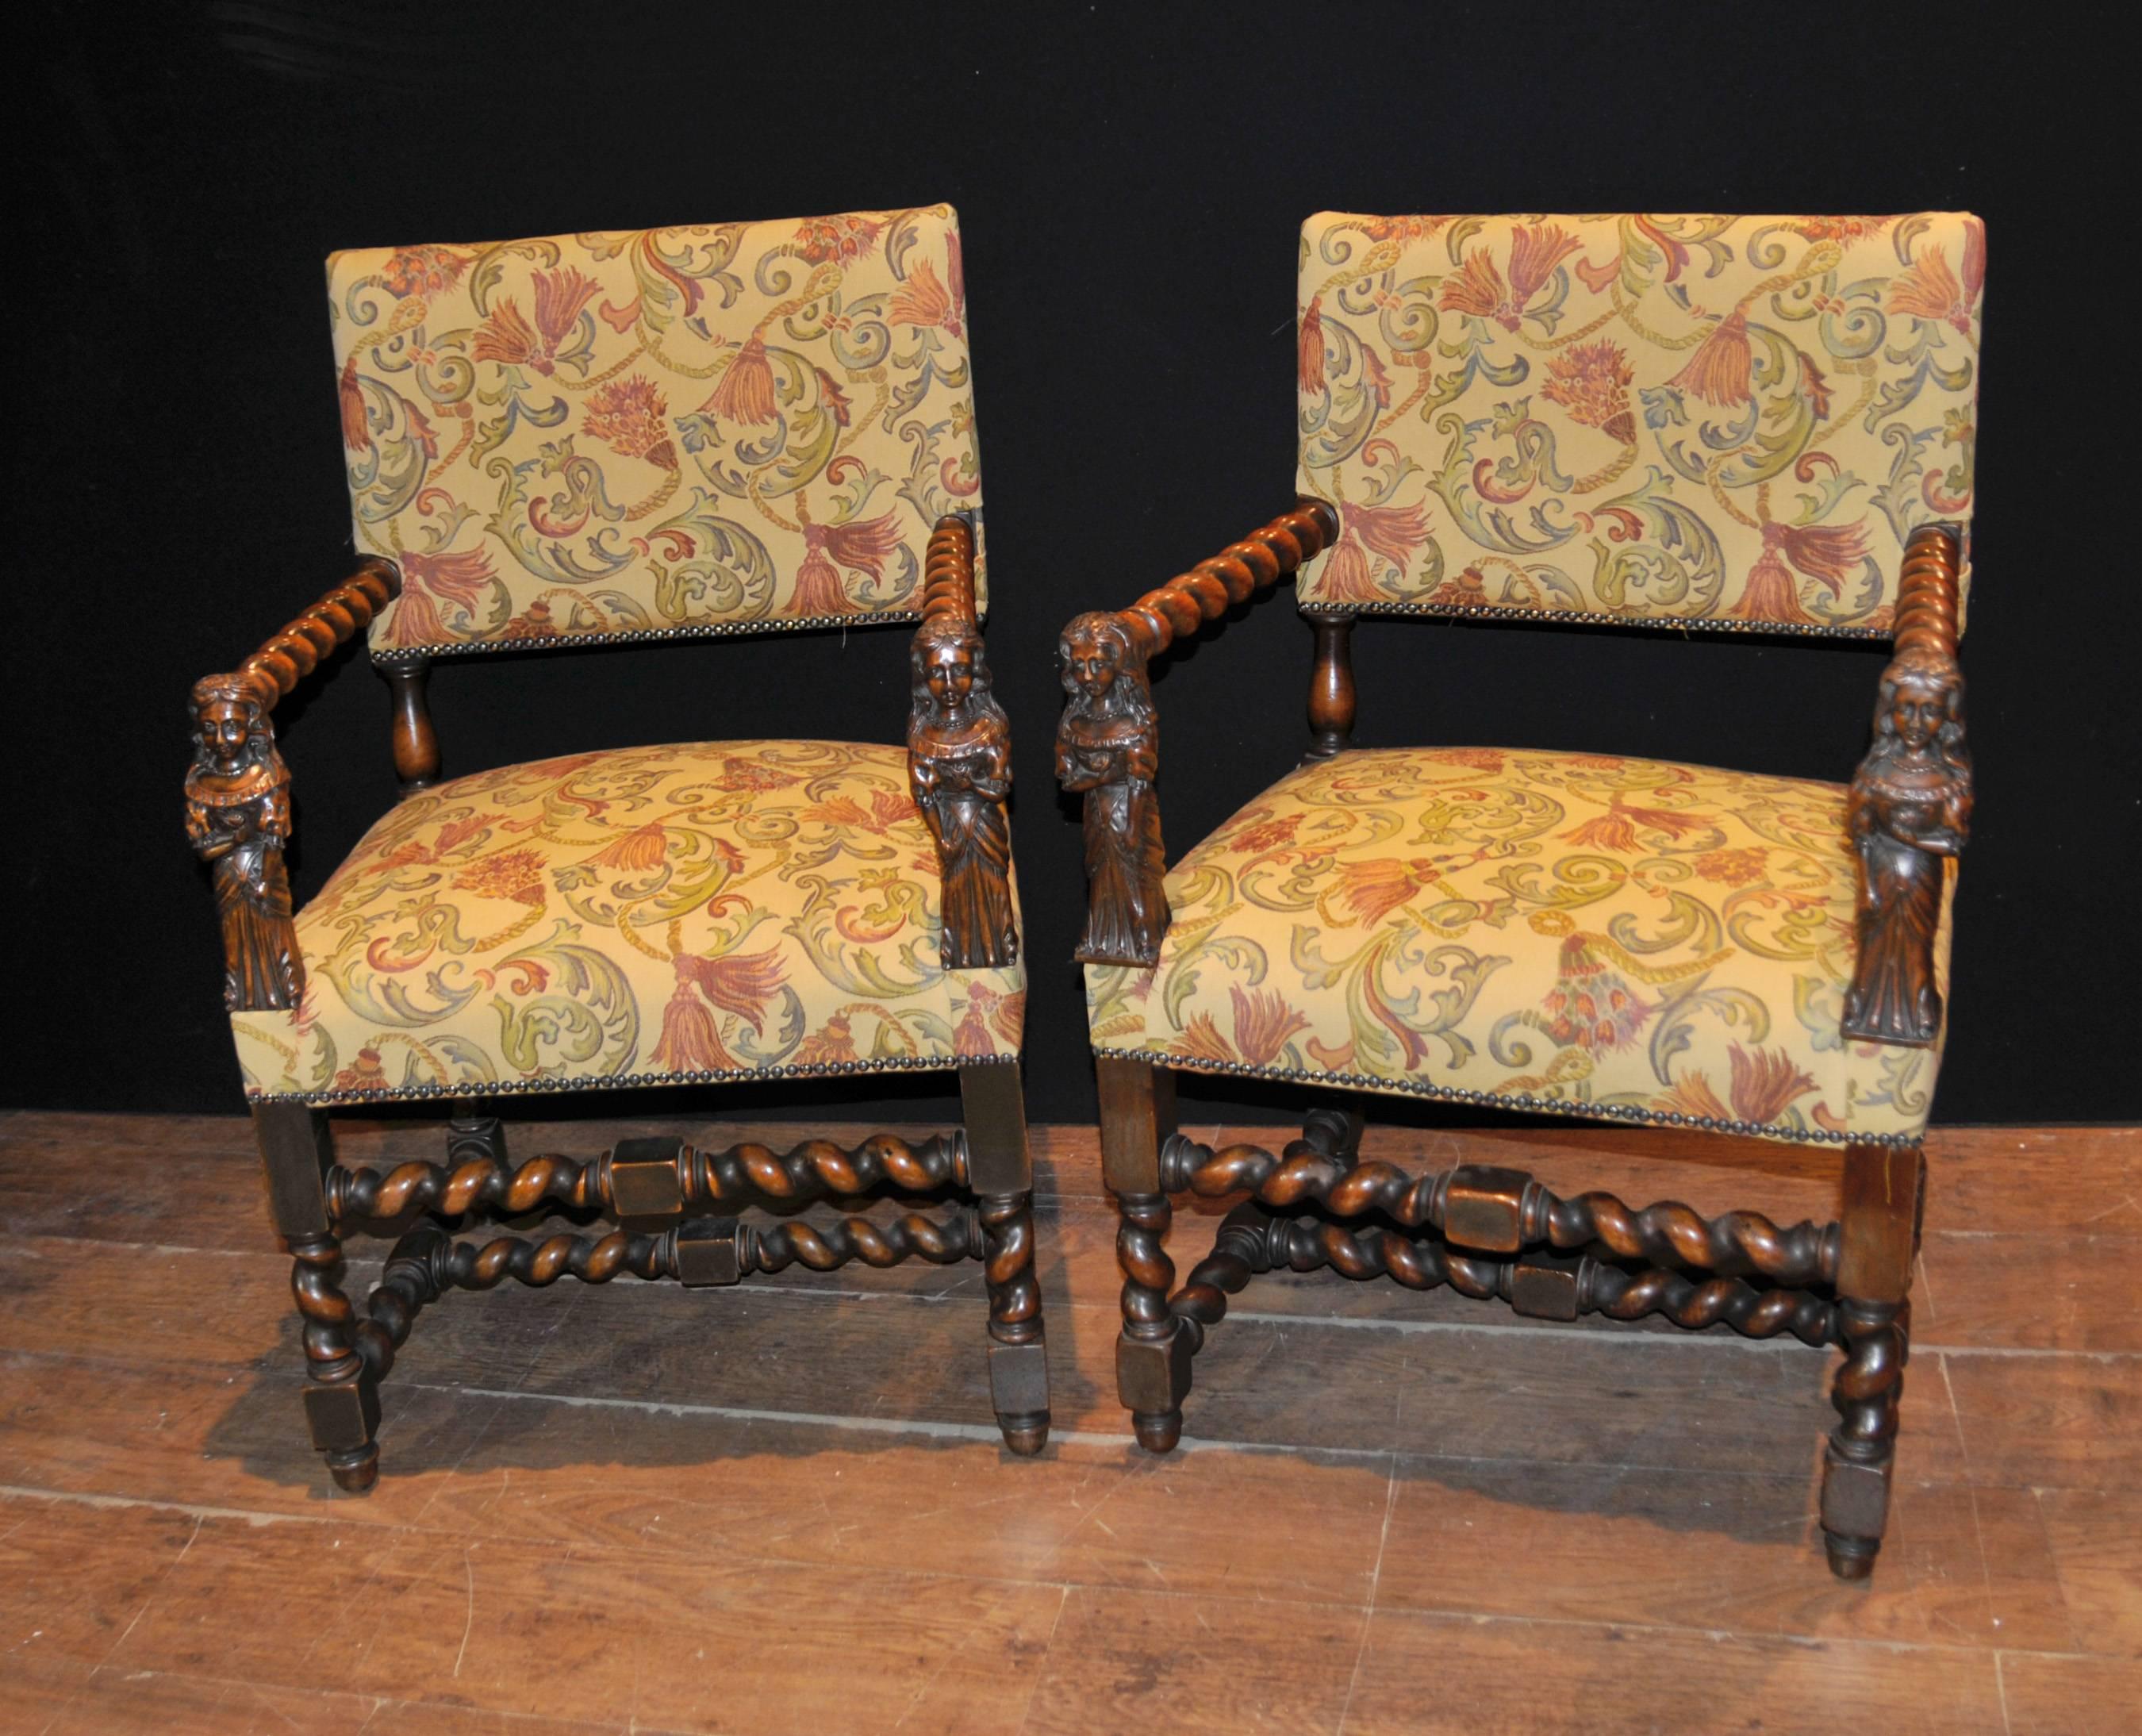 Antique Walnut Hand-Carved Italian Armchairs Barley Twist, 1860 For Sale 4